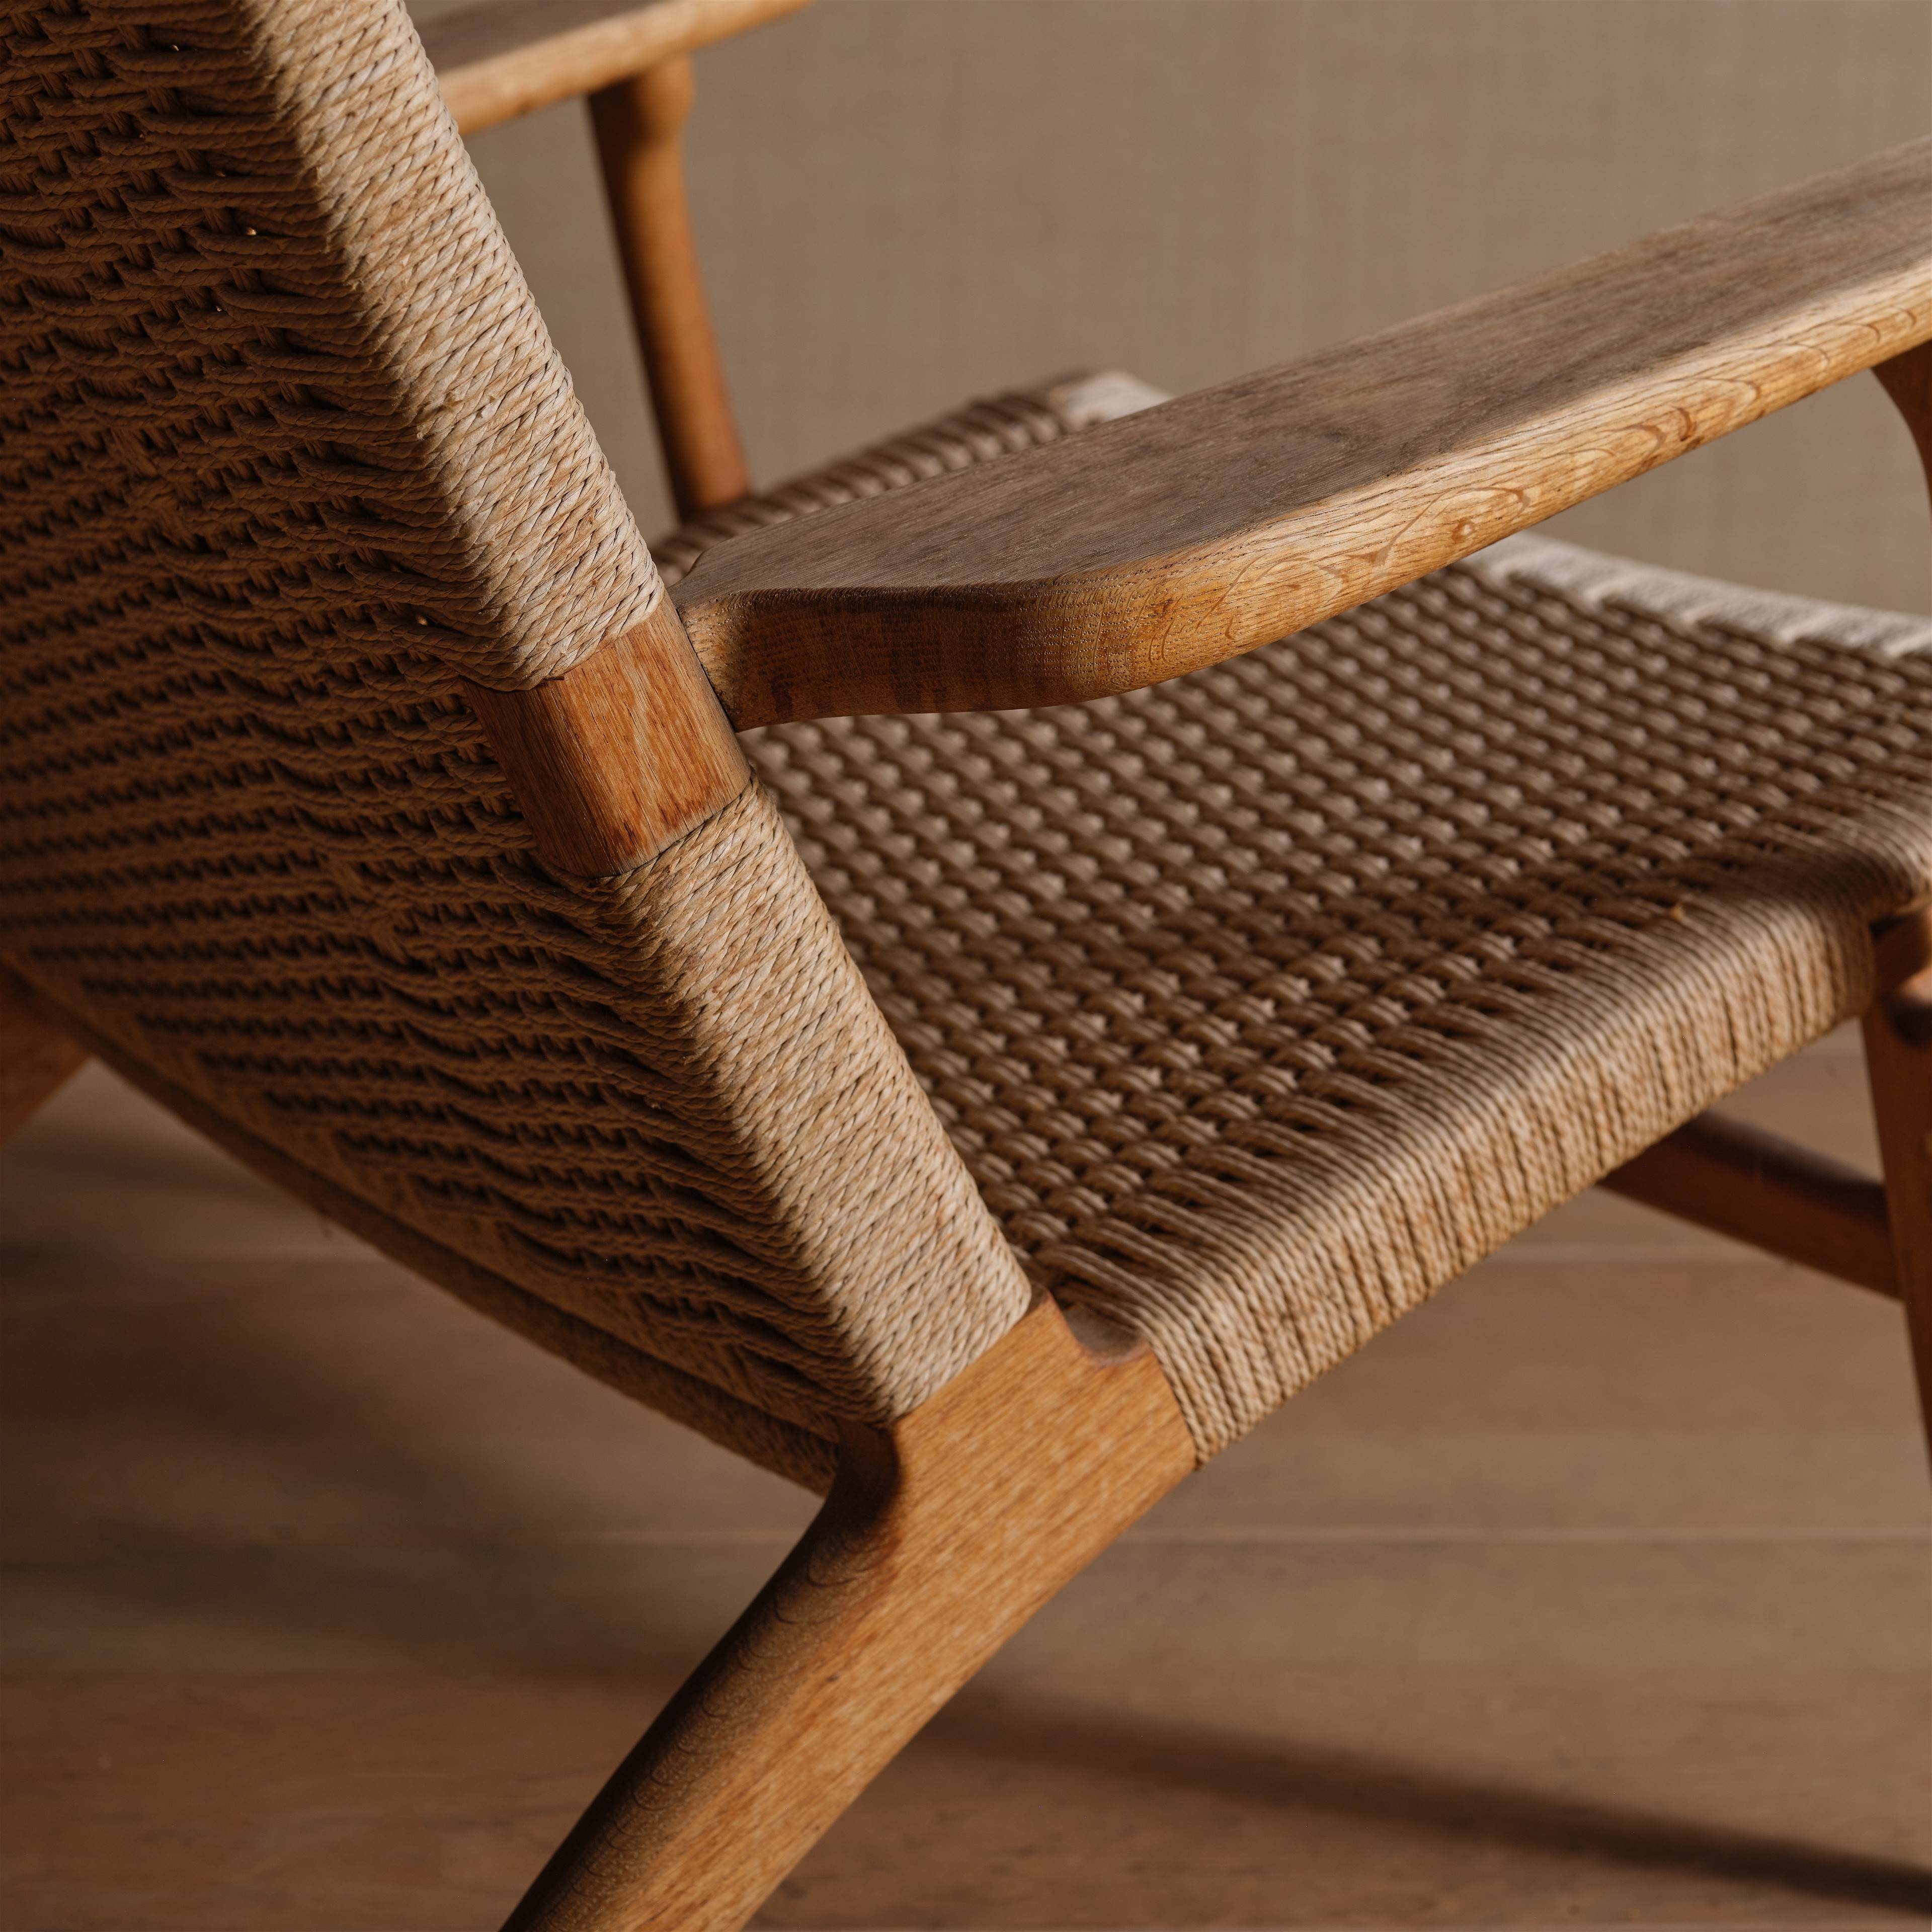 a close up of a wooden chair on a wooden floor